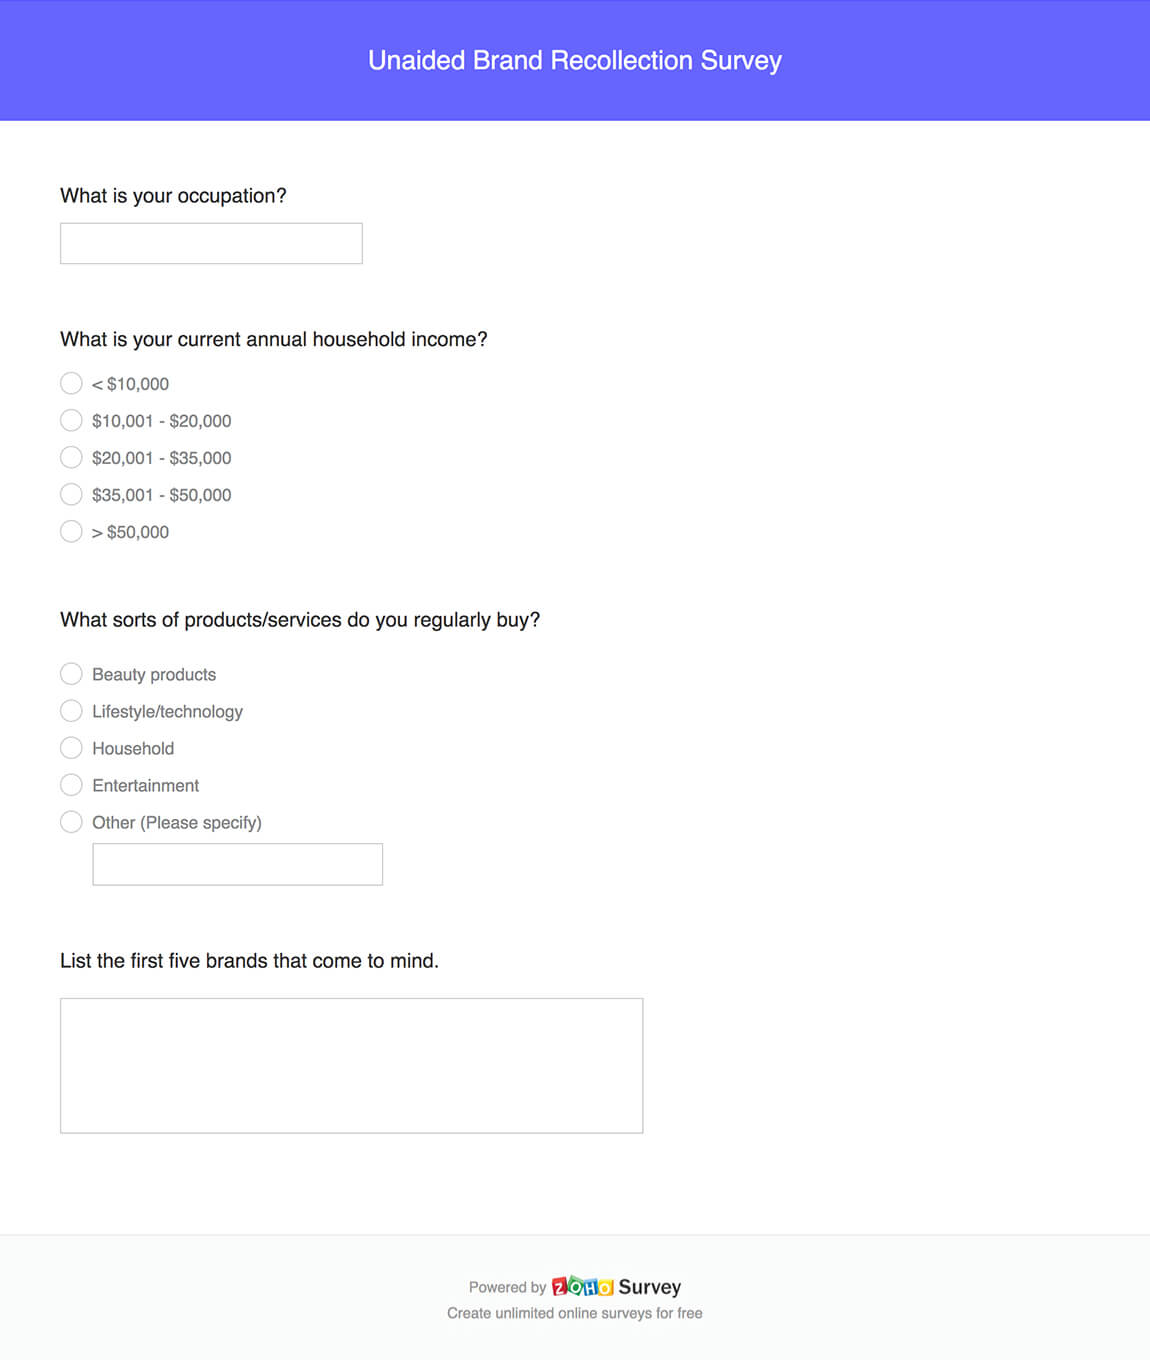 Unaided brand recollection survey questionnaire template